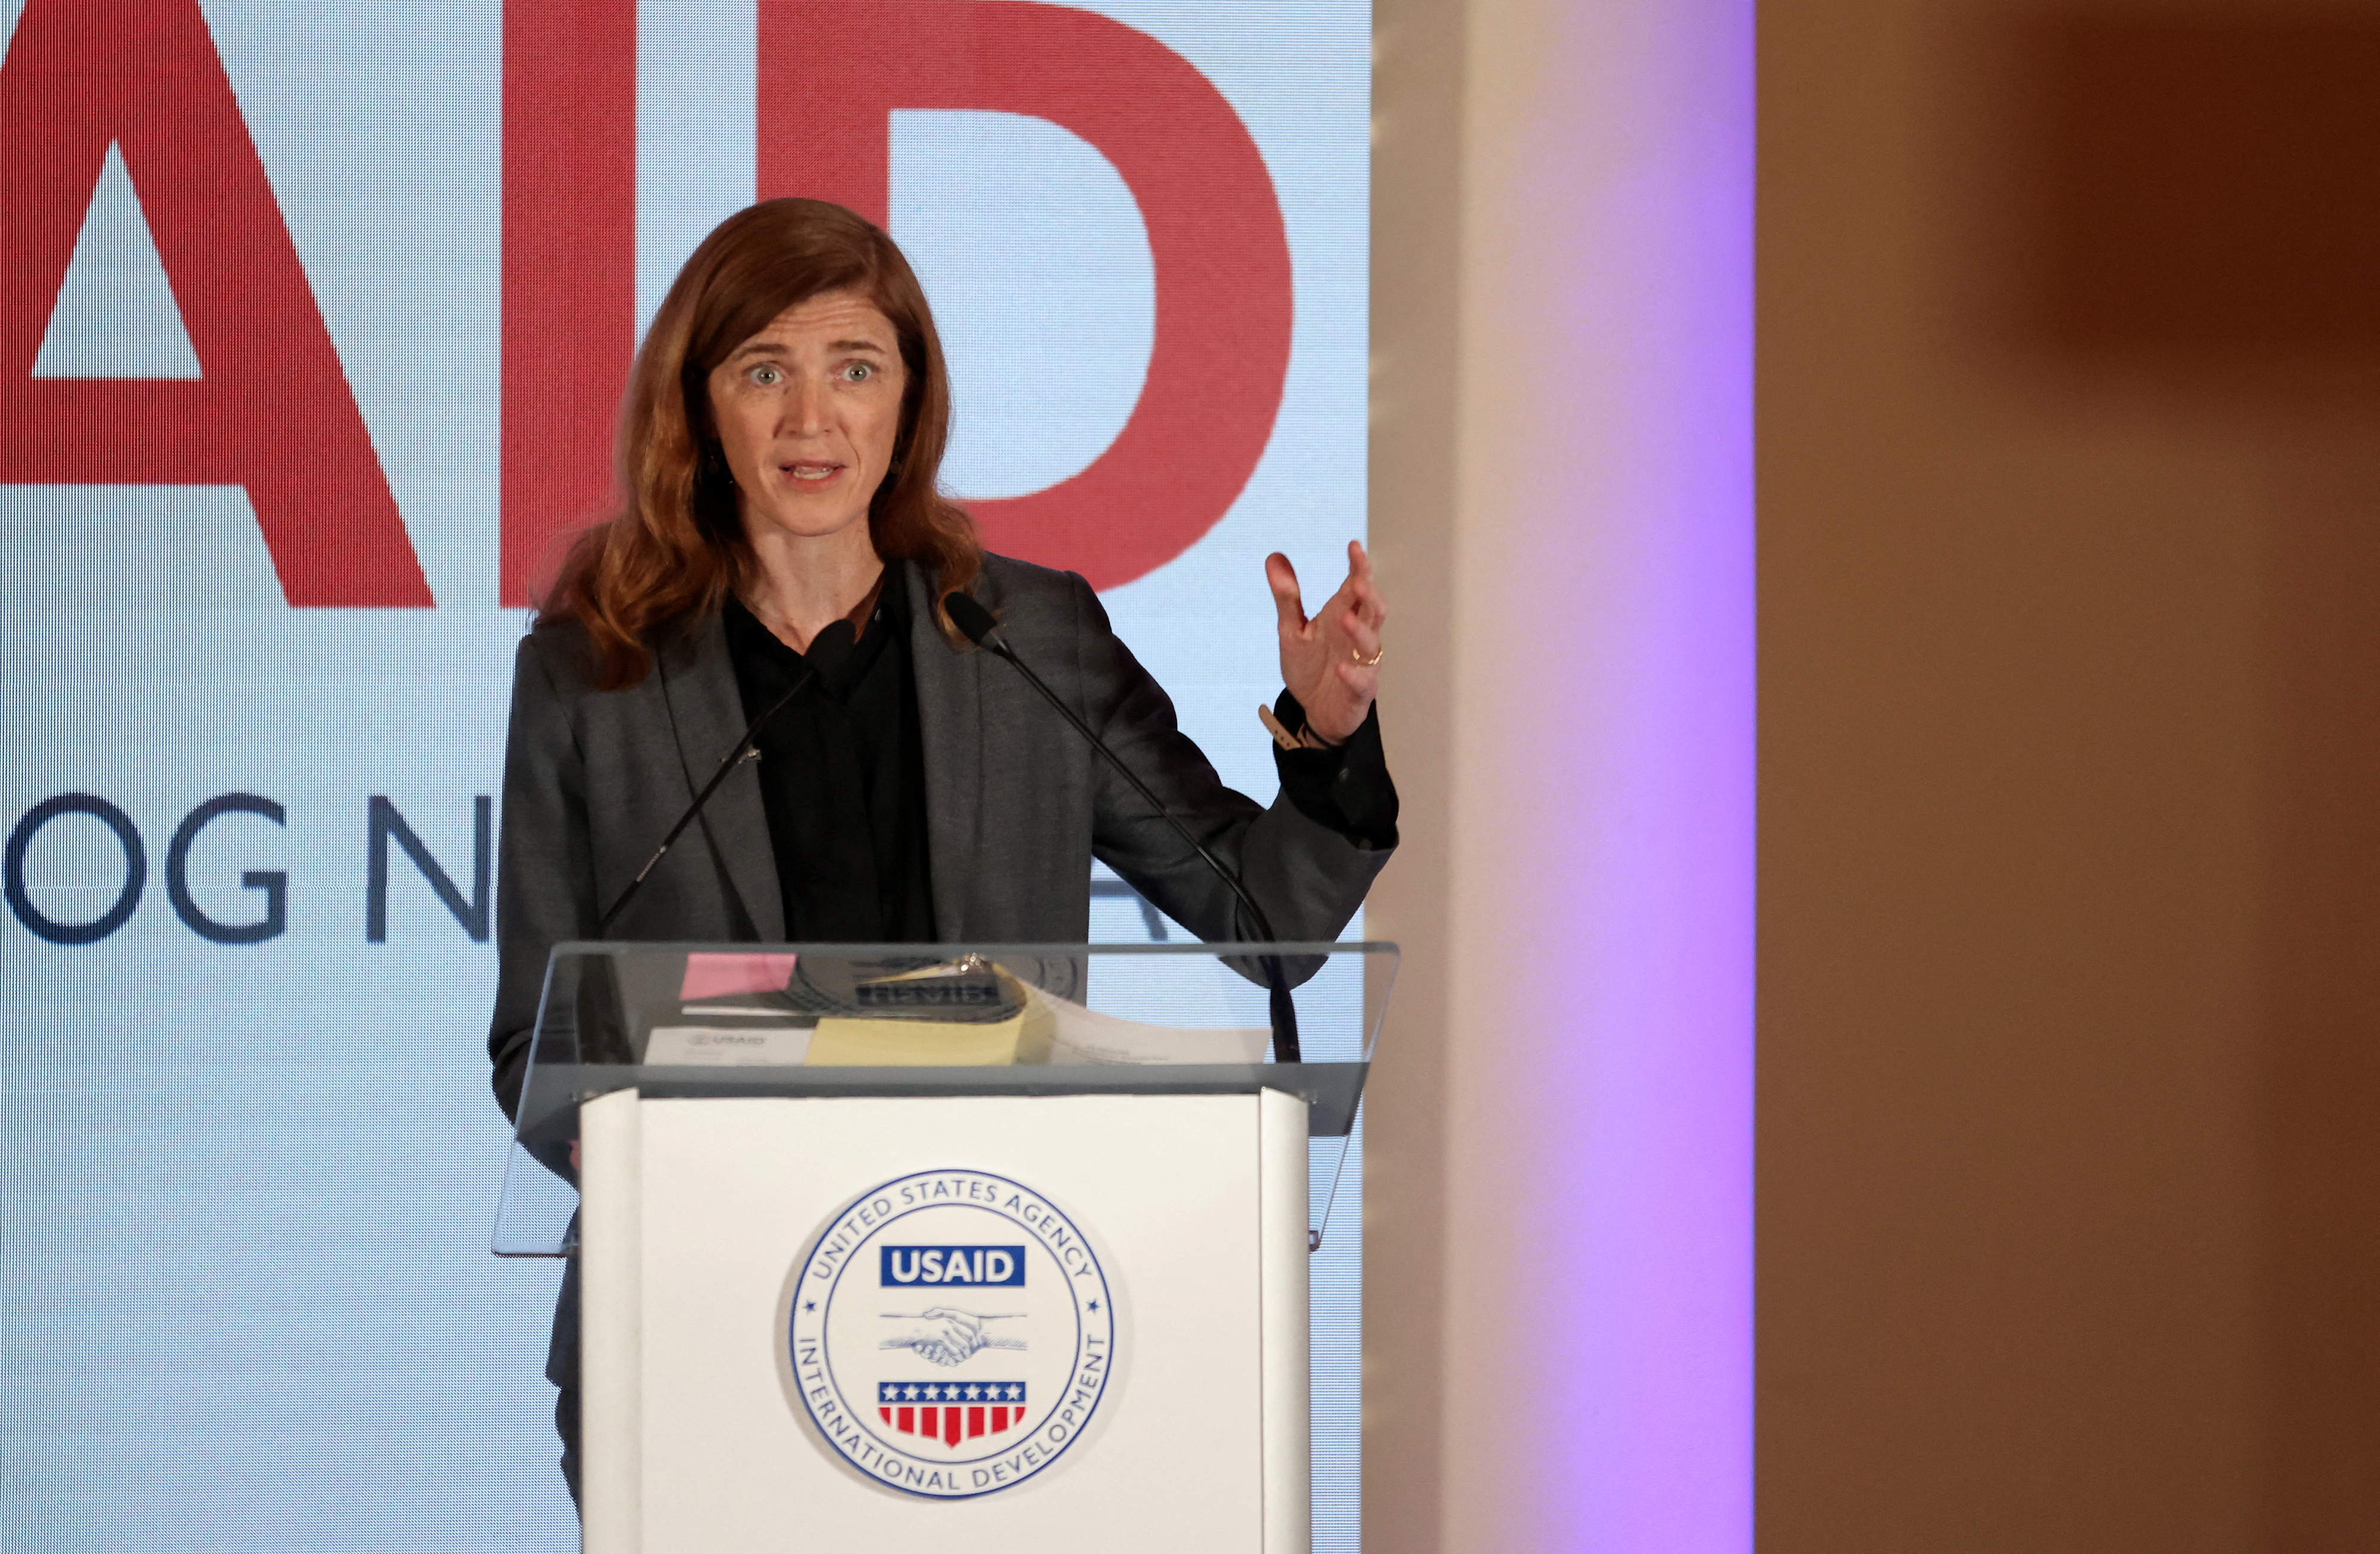 Samantha Power, the administrator of the U.S. Agency for International Development (USAID), speaks during a press conference